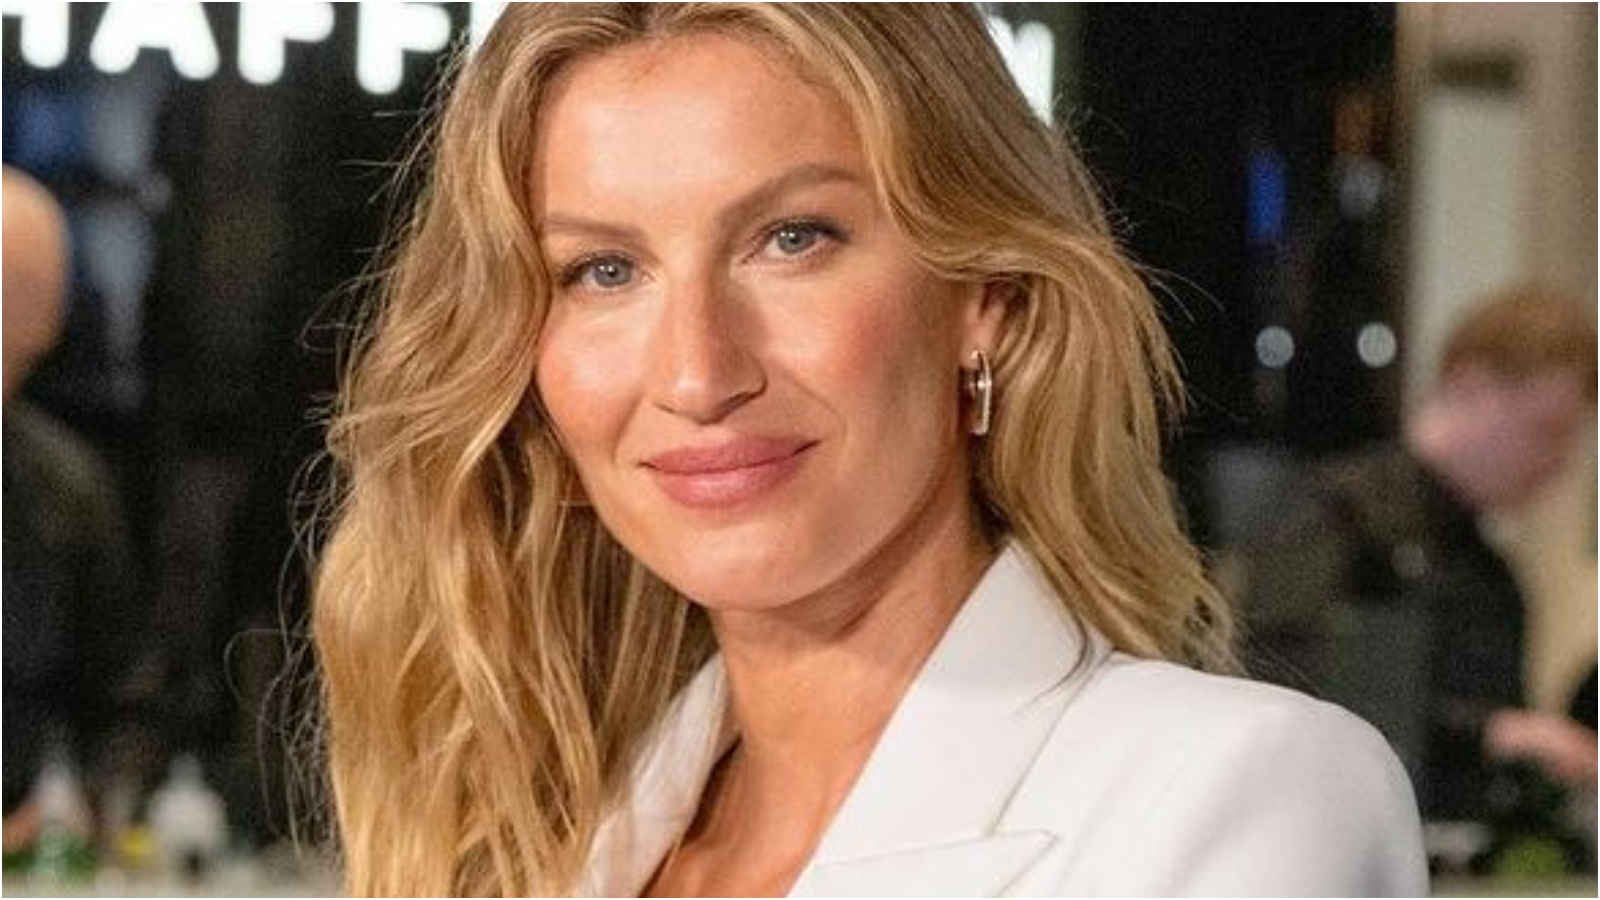 Gisele Bündchen raises more than R$4.5 million for victims in Republika Srpska after appeal in English